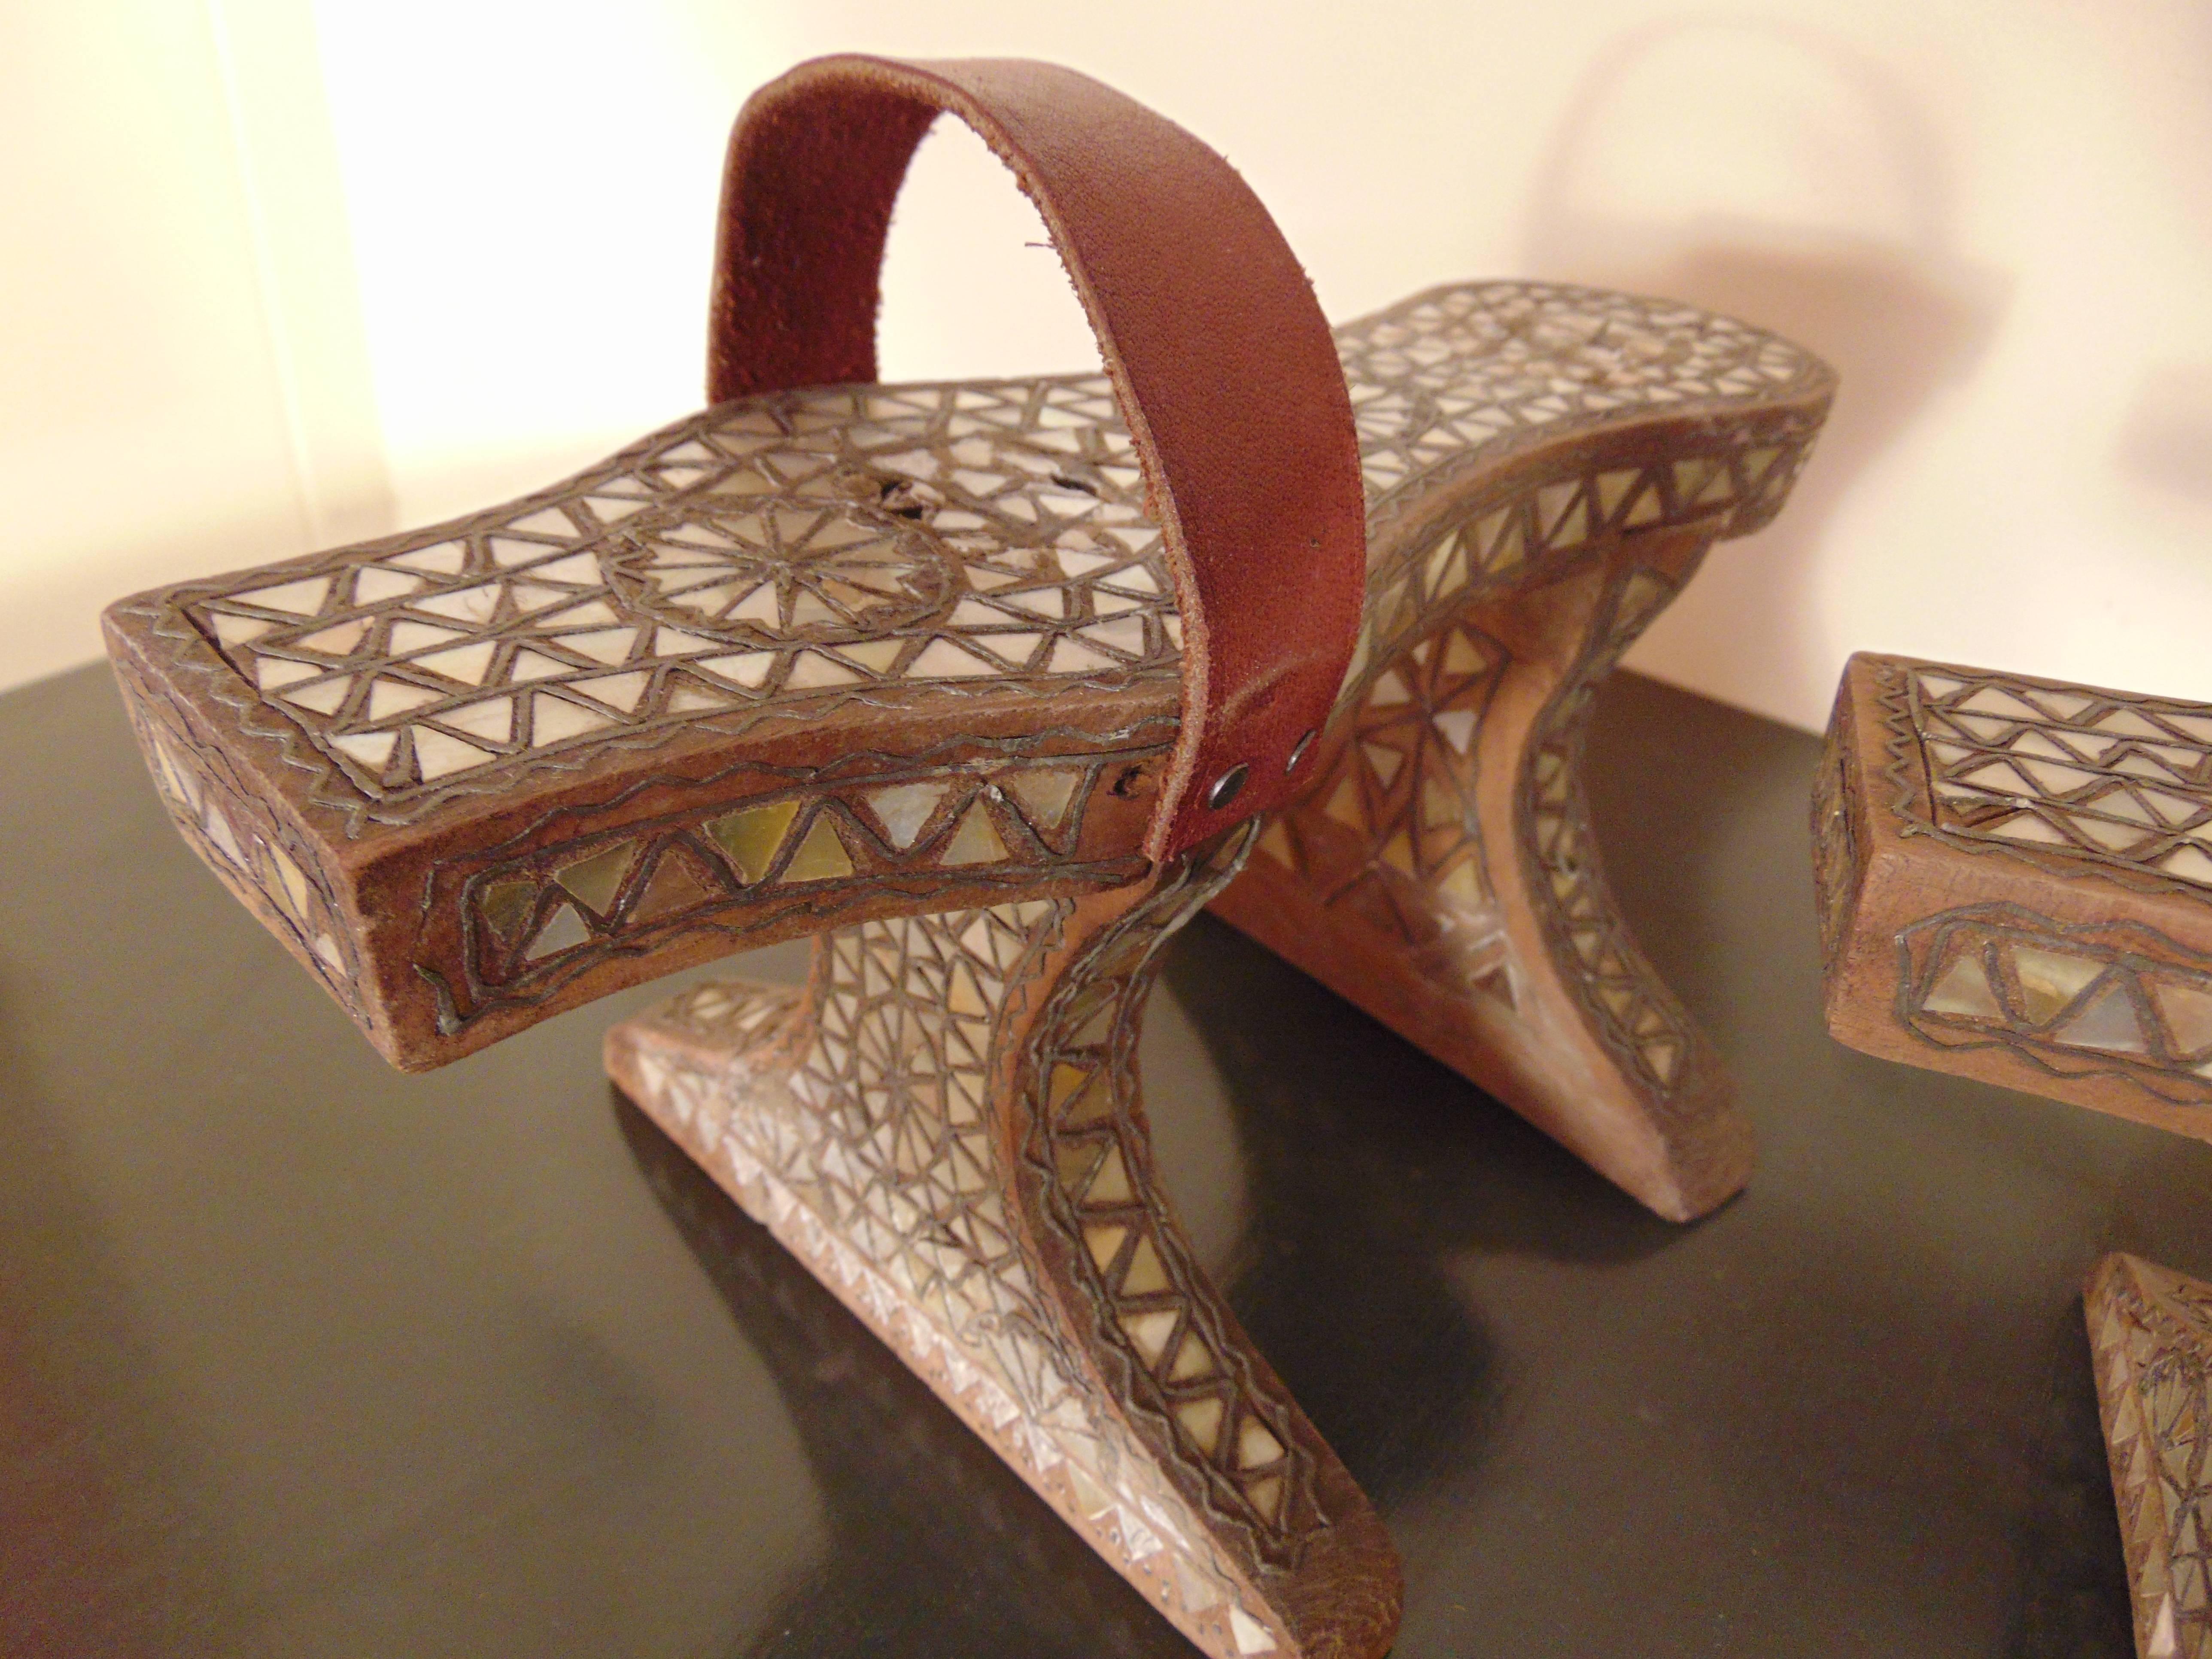 Islamic Early 19th Century Wooden Shoes 'Kibkab' with Very Intricate, Mother-of-Pearl